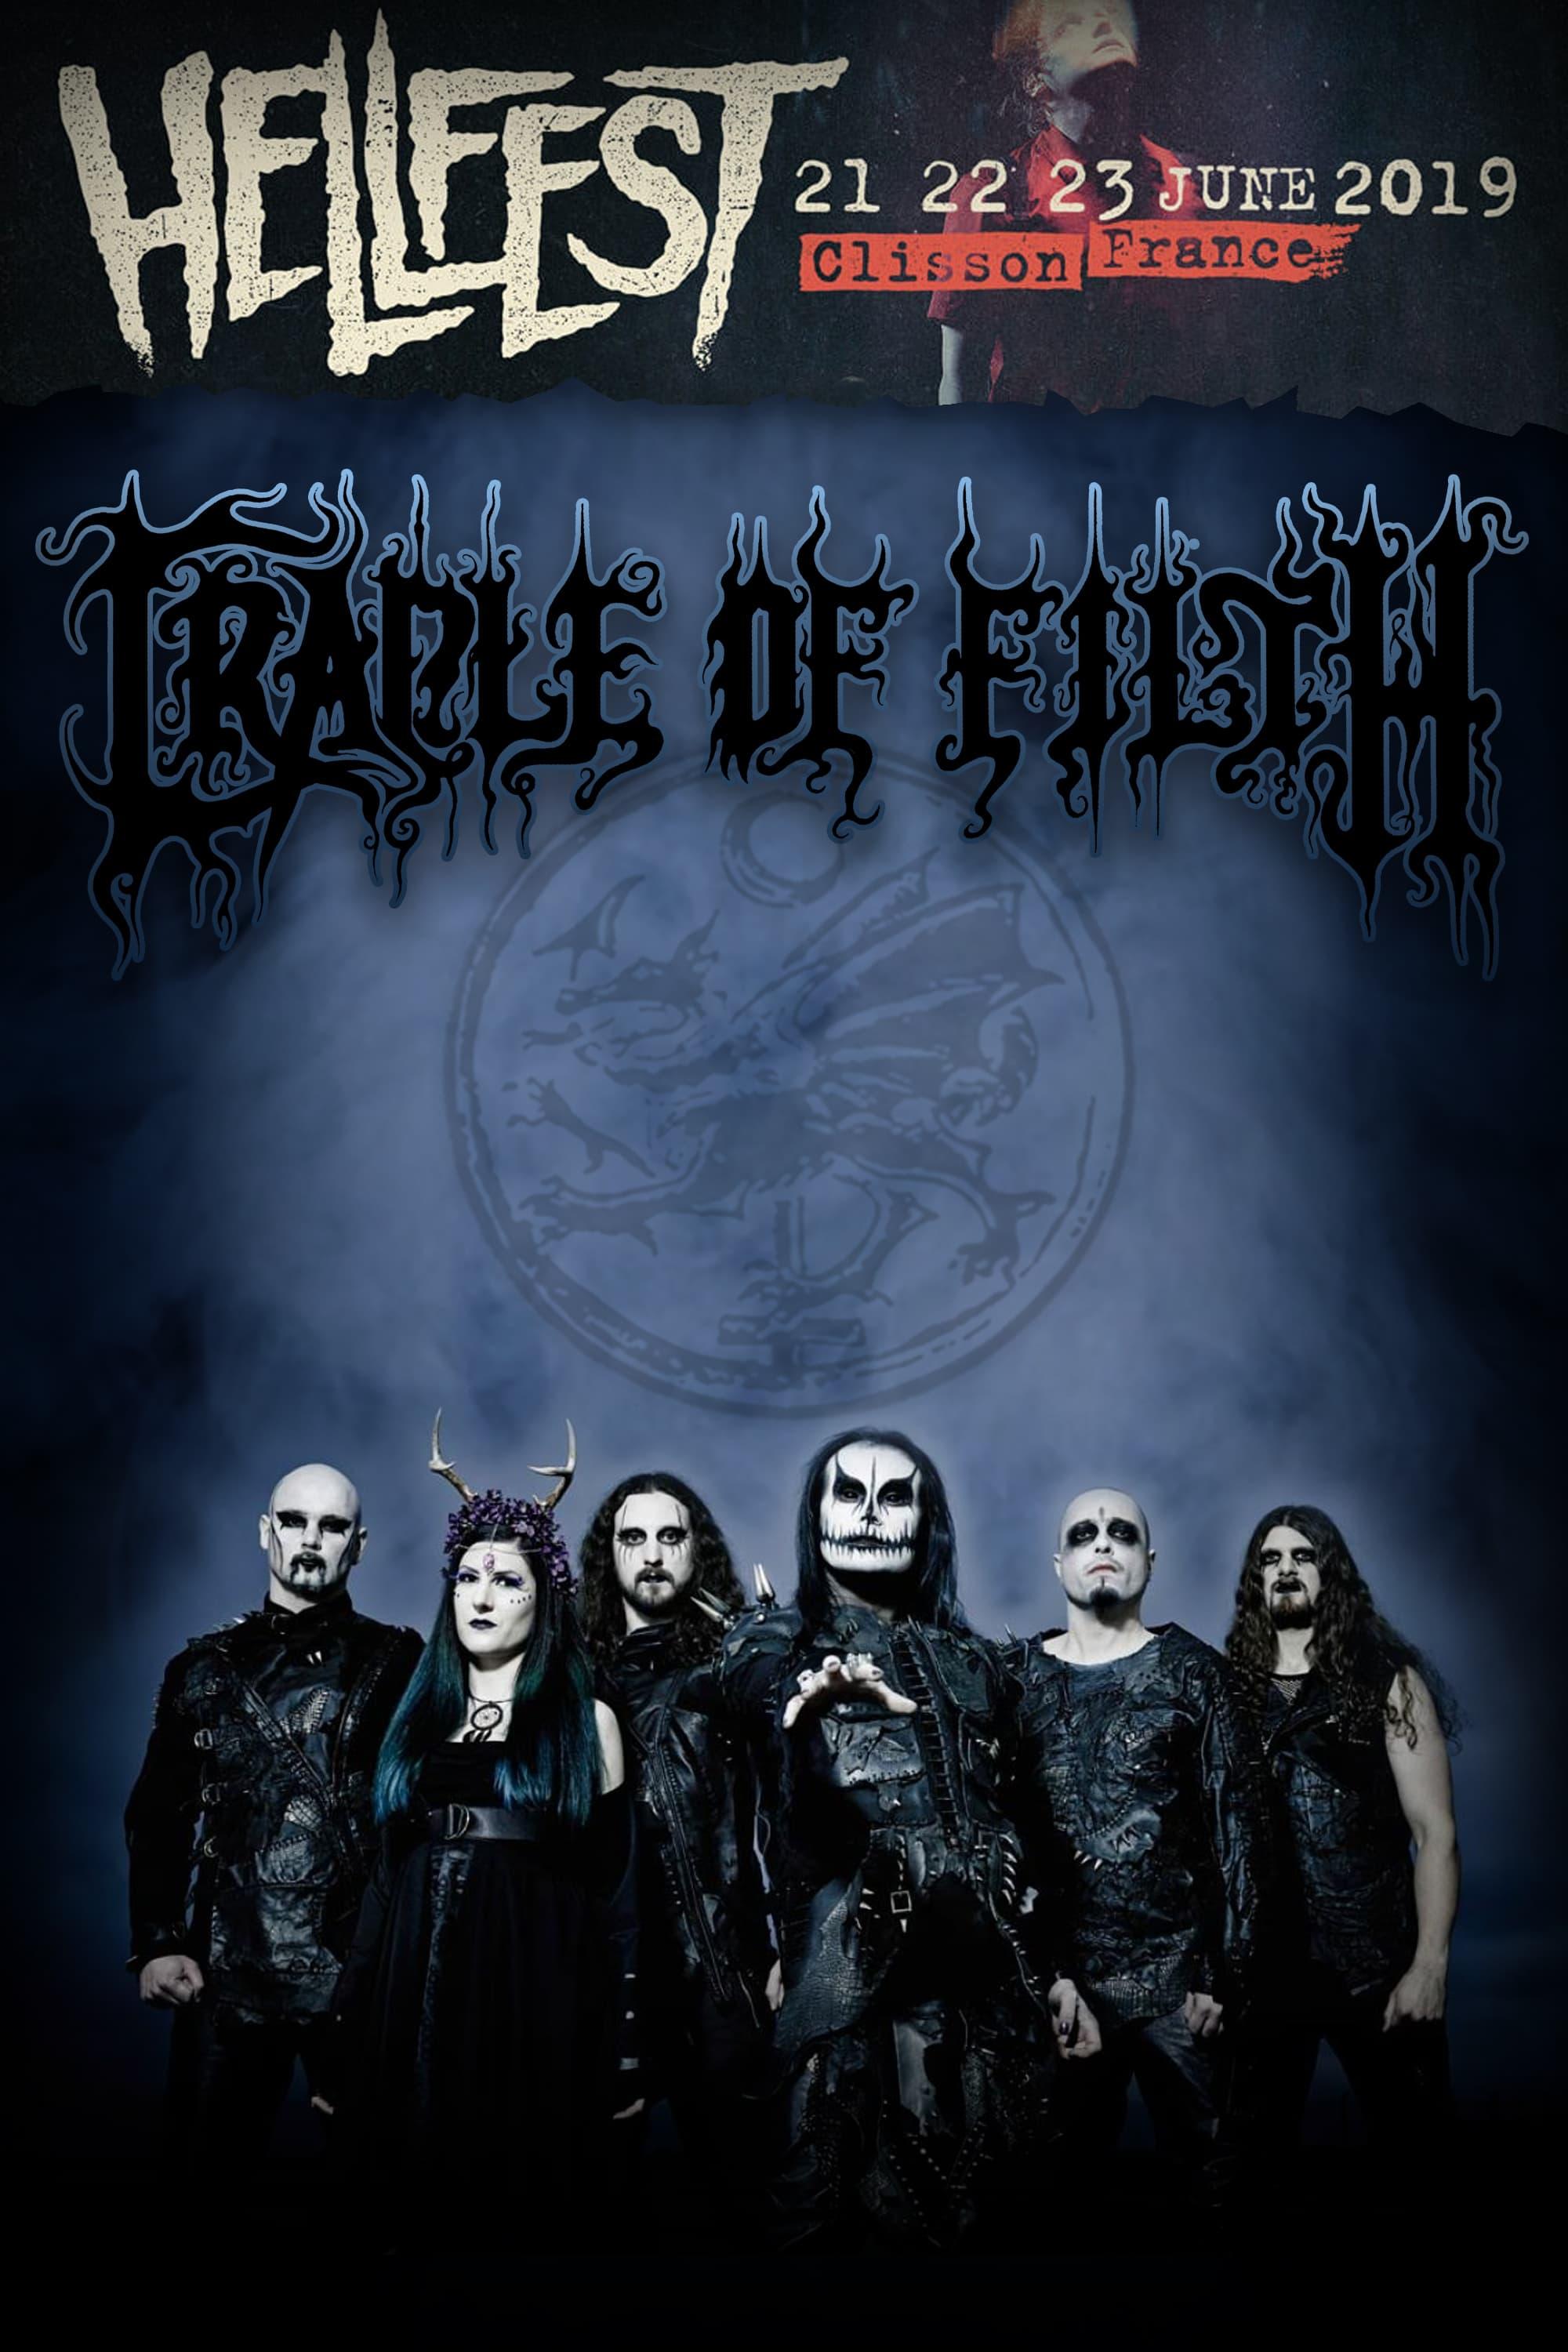 Cradle of Filth: Hellfest poster